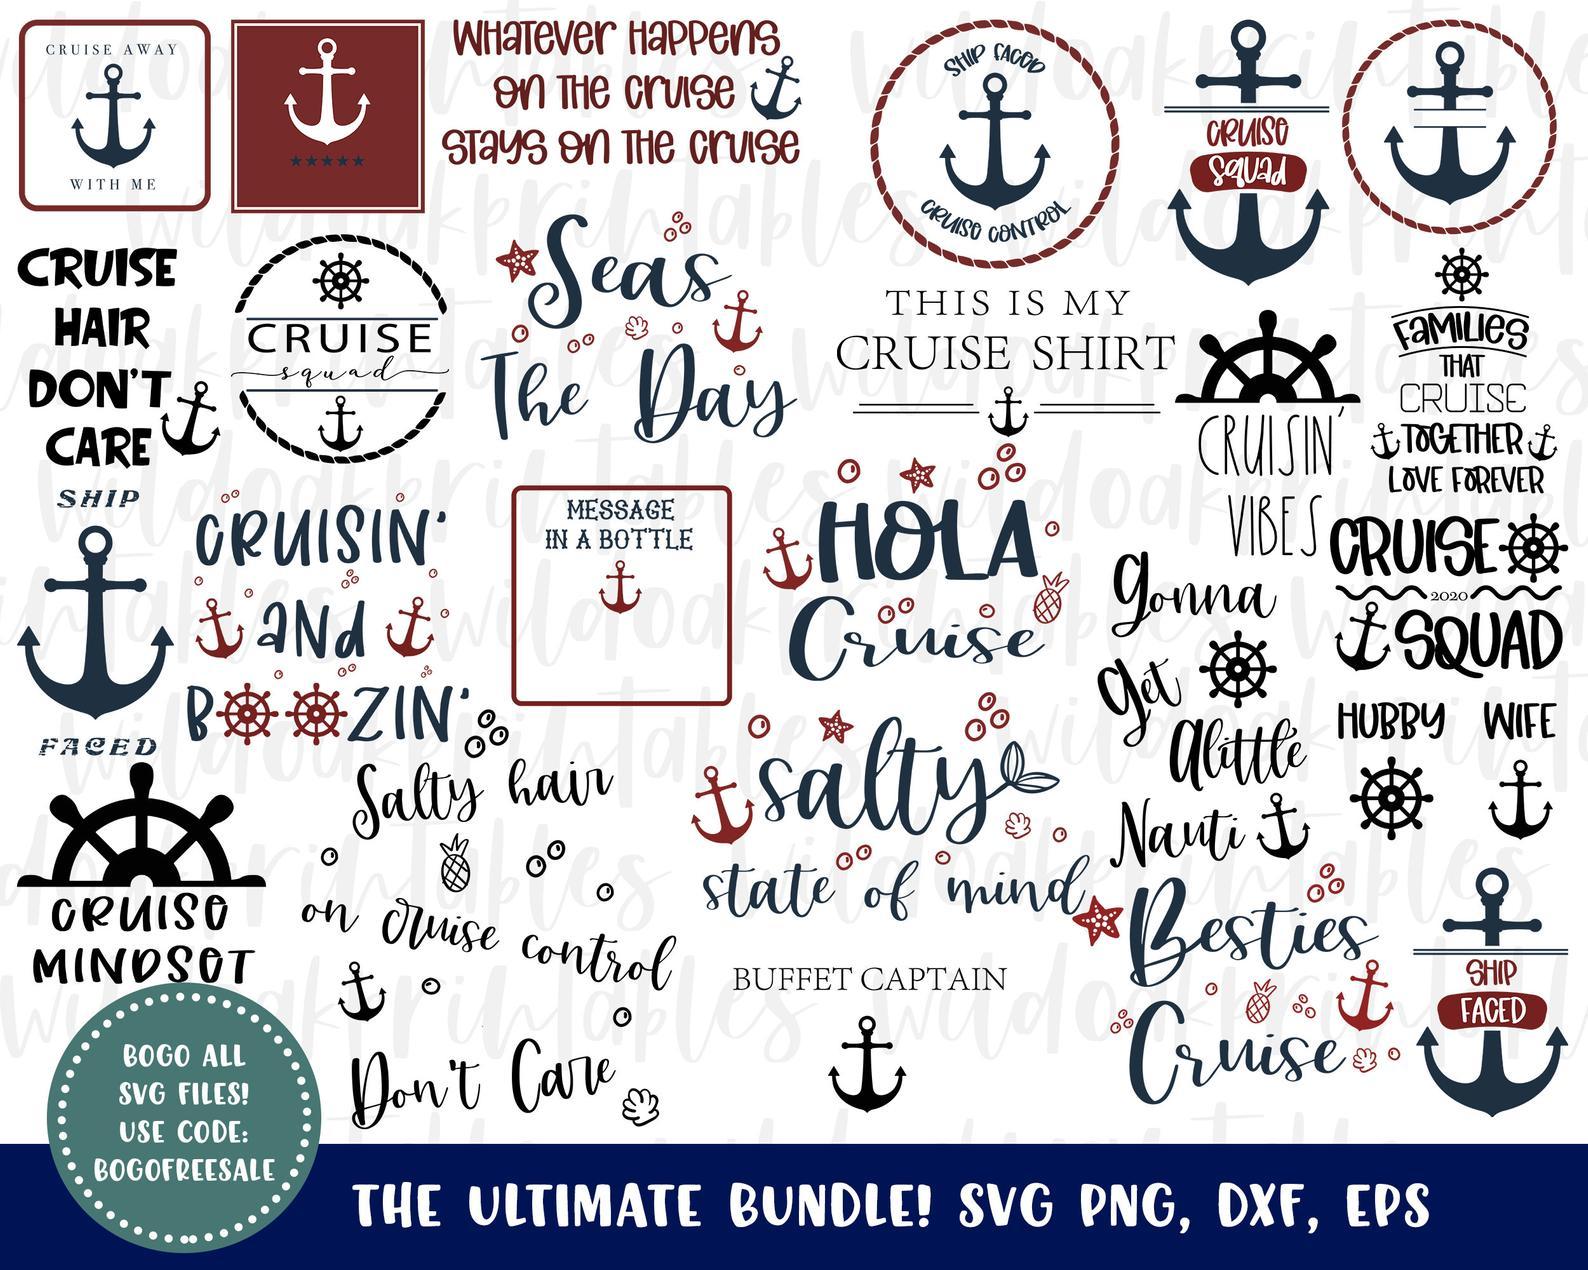 Download 25 Cruise Svg Bundle Funny Cruise Svg Files For Cricut Sailor Svg Boat Svg Boating Svg Funny Dad Cruise Vacation Svgs Files Beach Svg So Fontsy